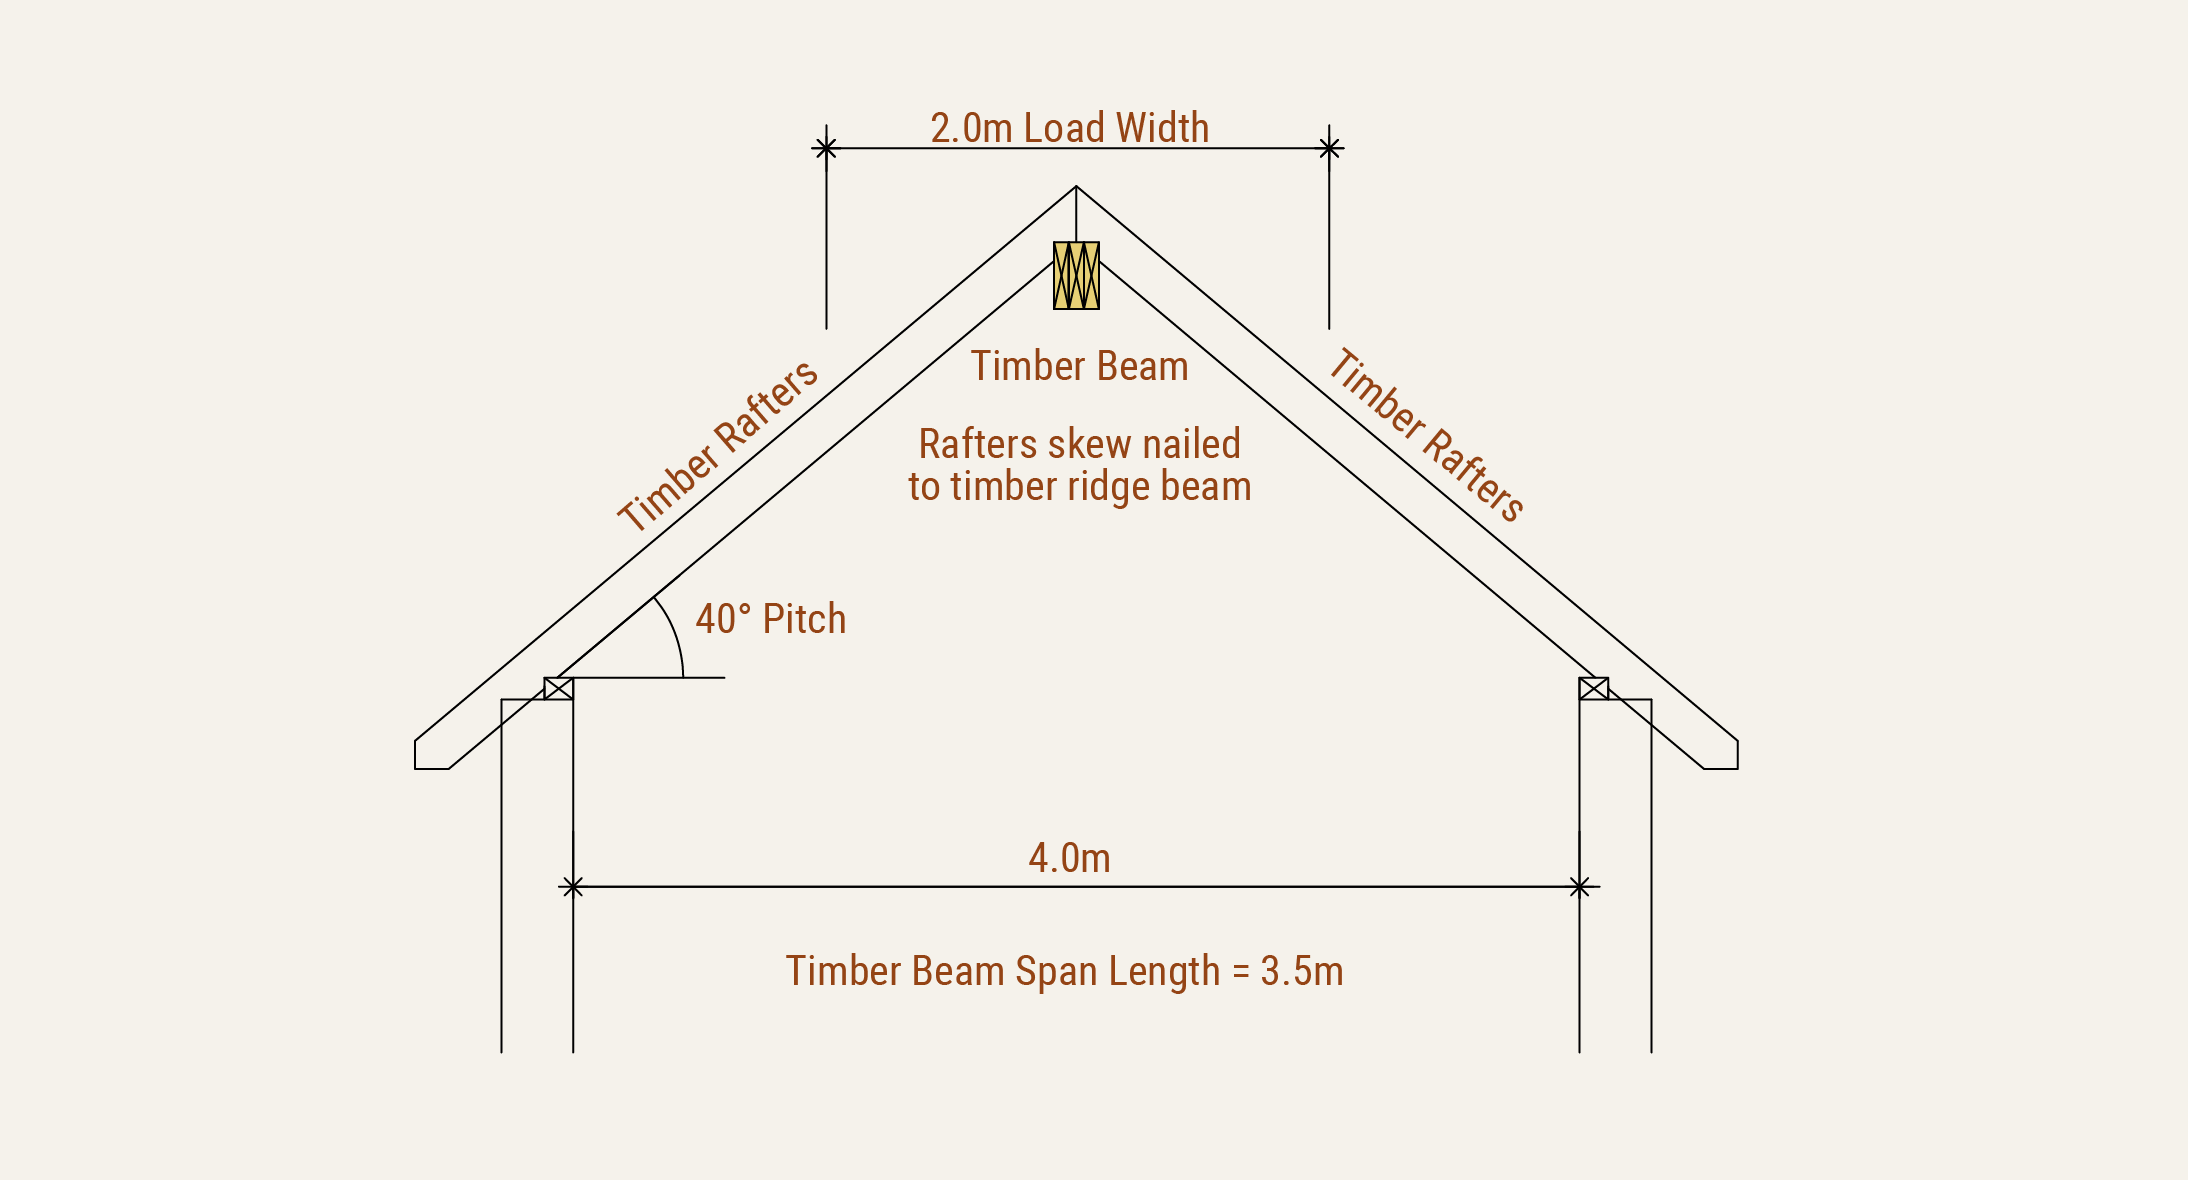 steel beam calculations for steel beam supporting timber floor joists